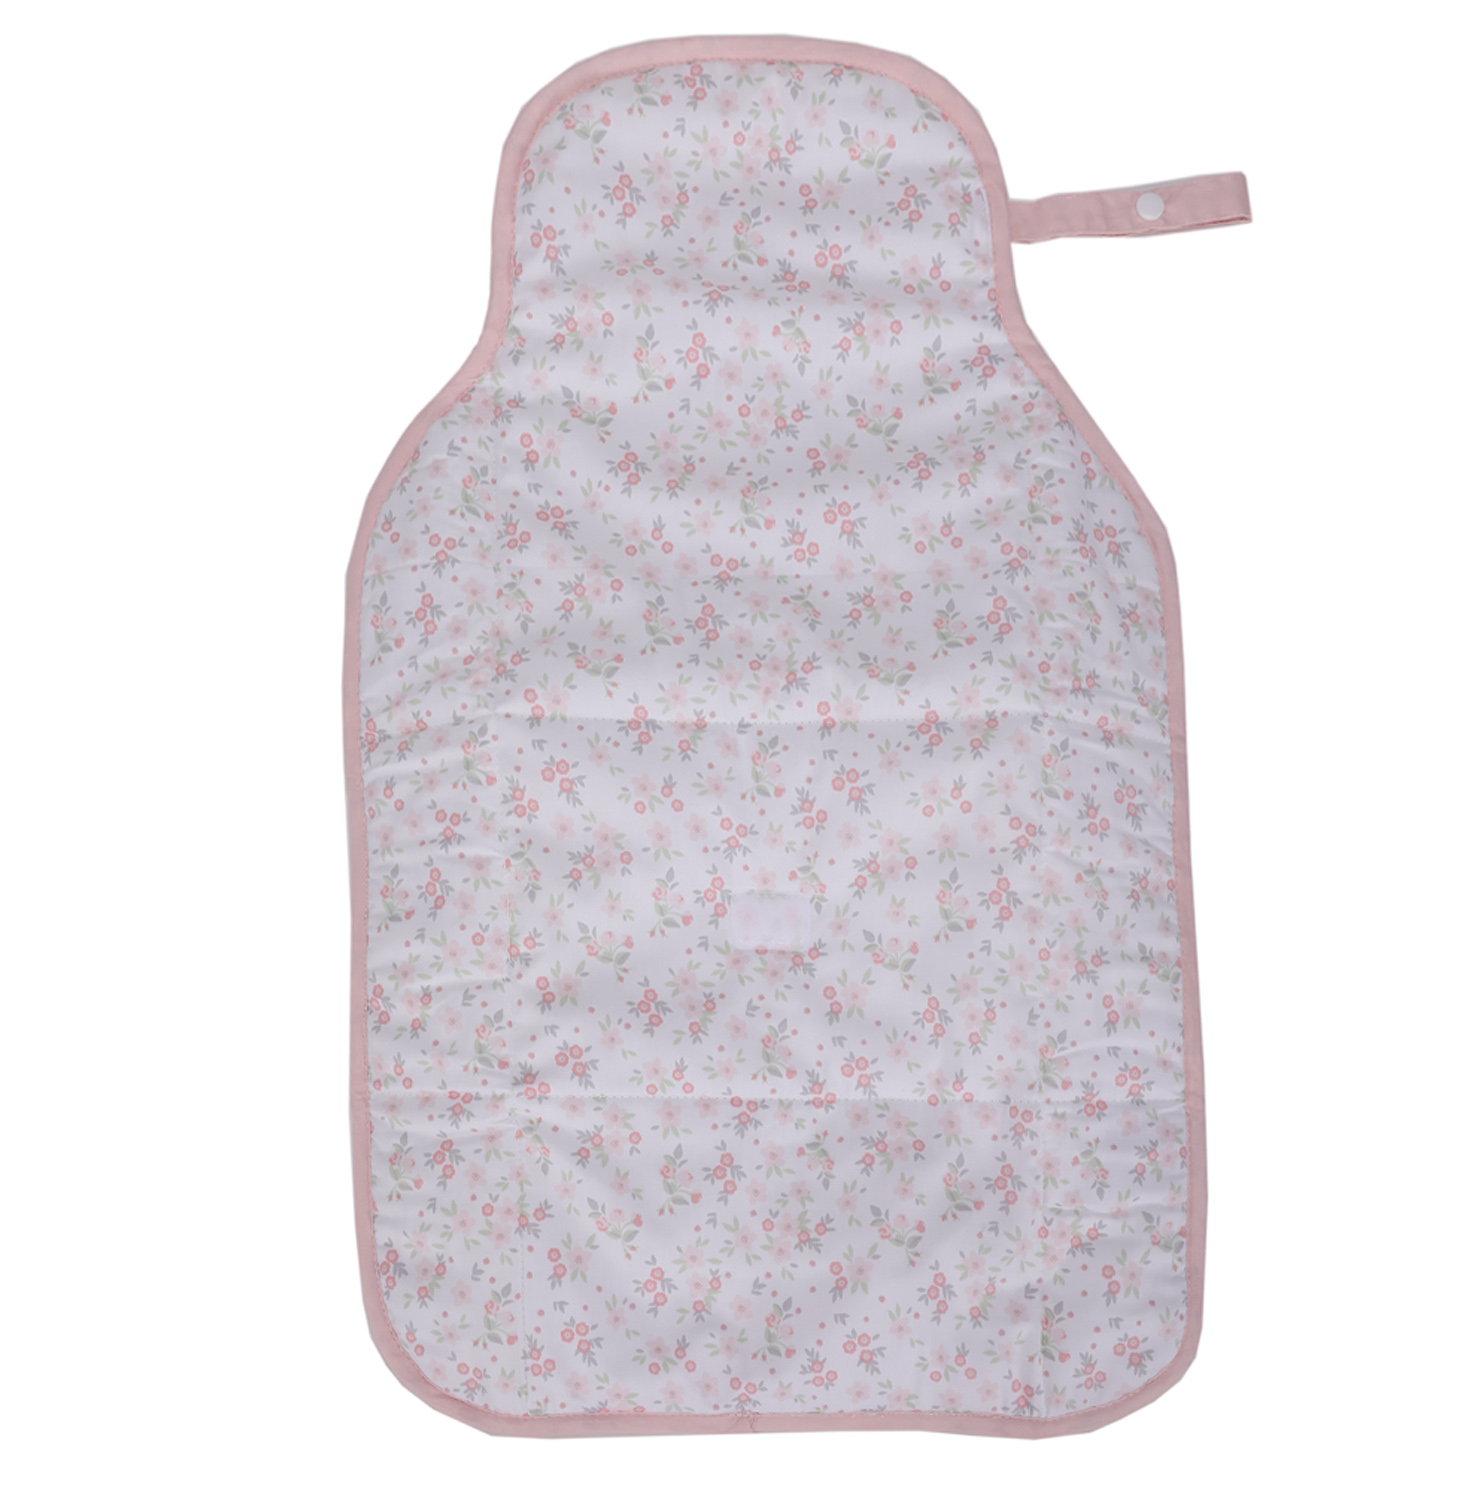 Baby Waterproof Cotton Printing Diaper Clothes Changing Mat 65*40cm Portable Changing Mat